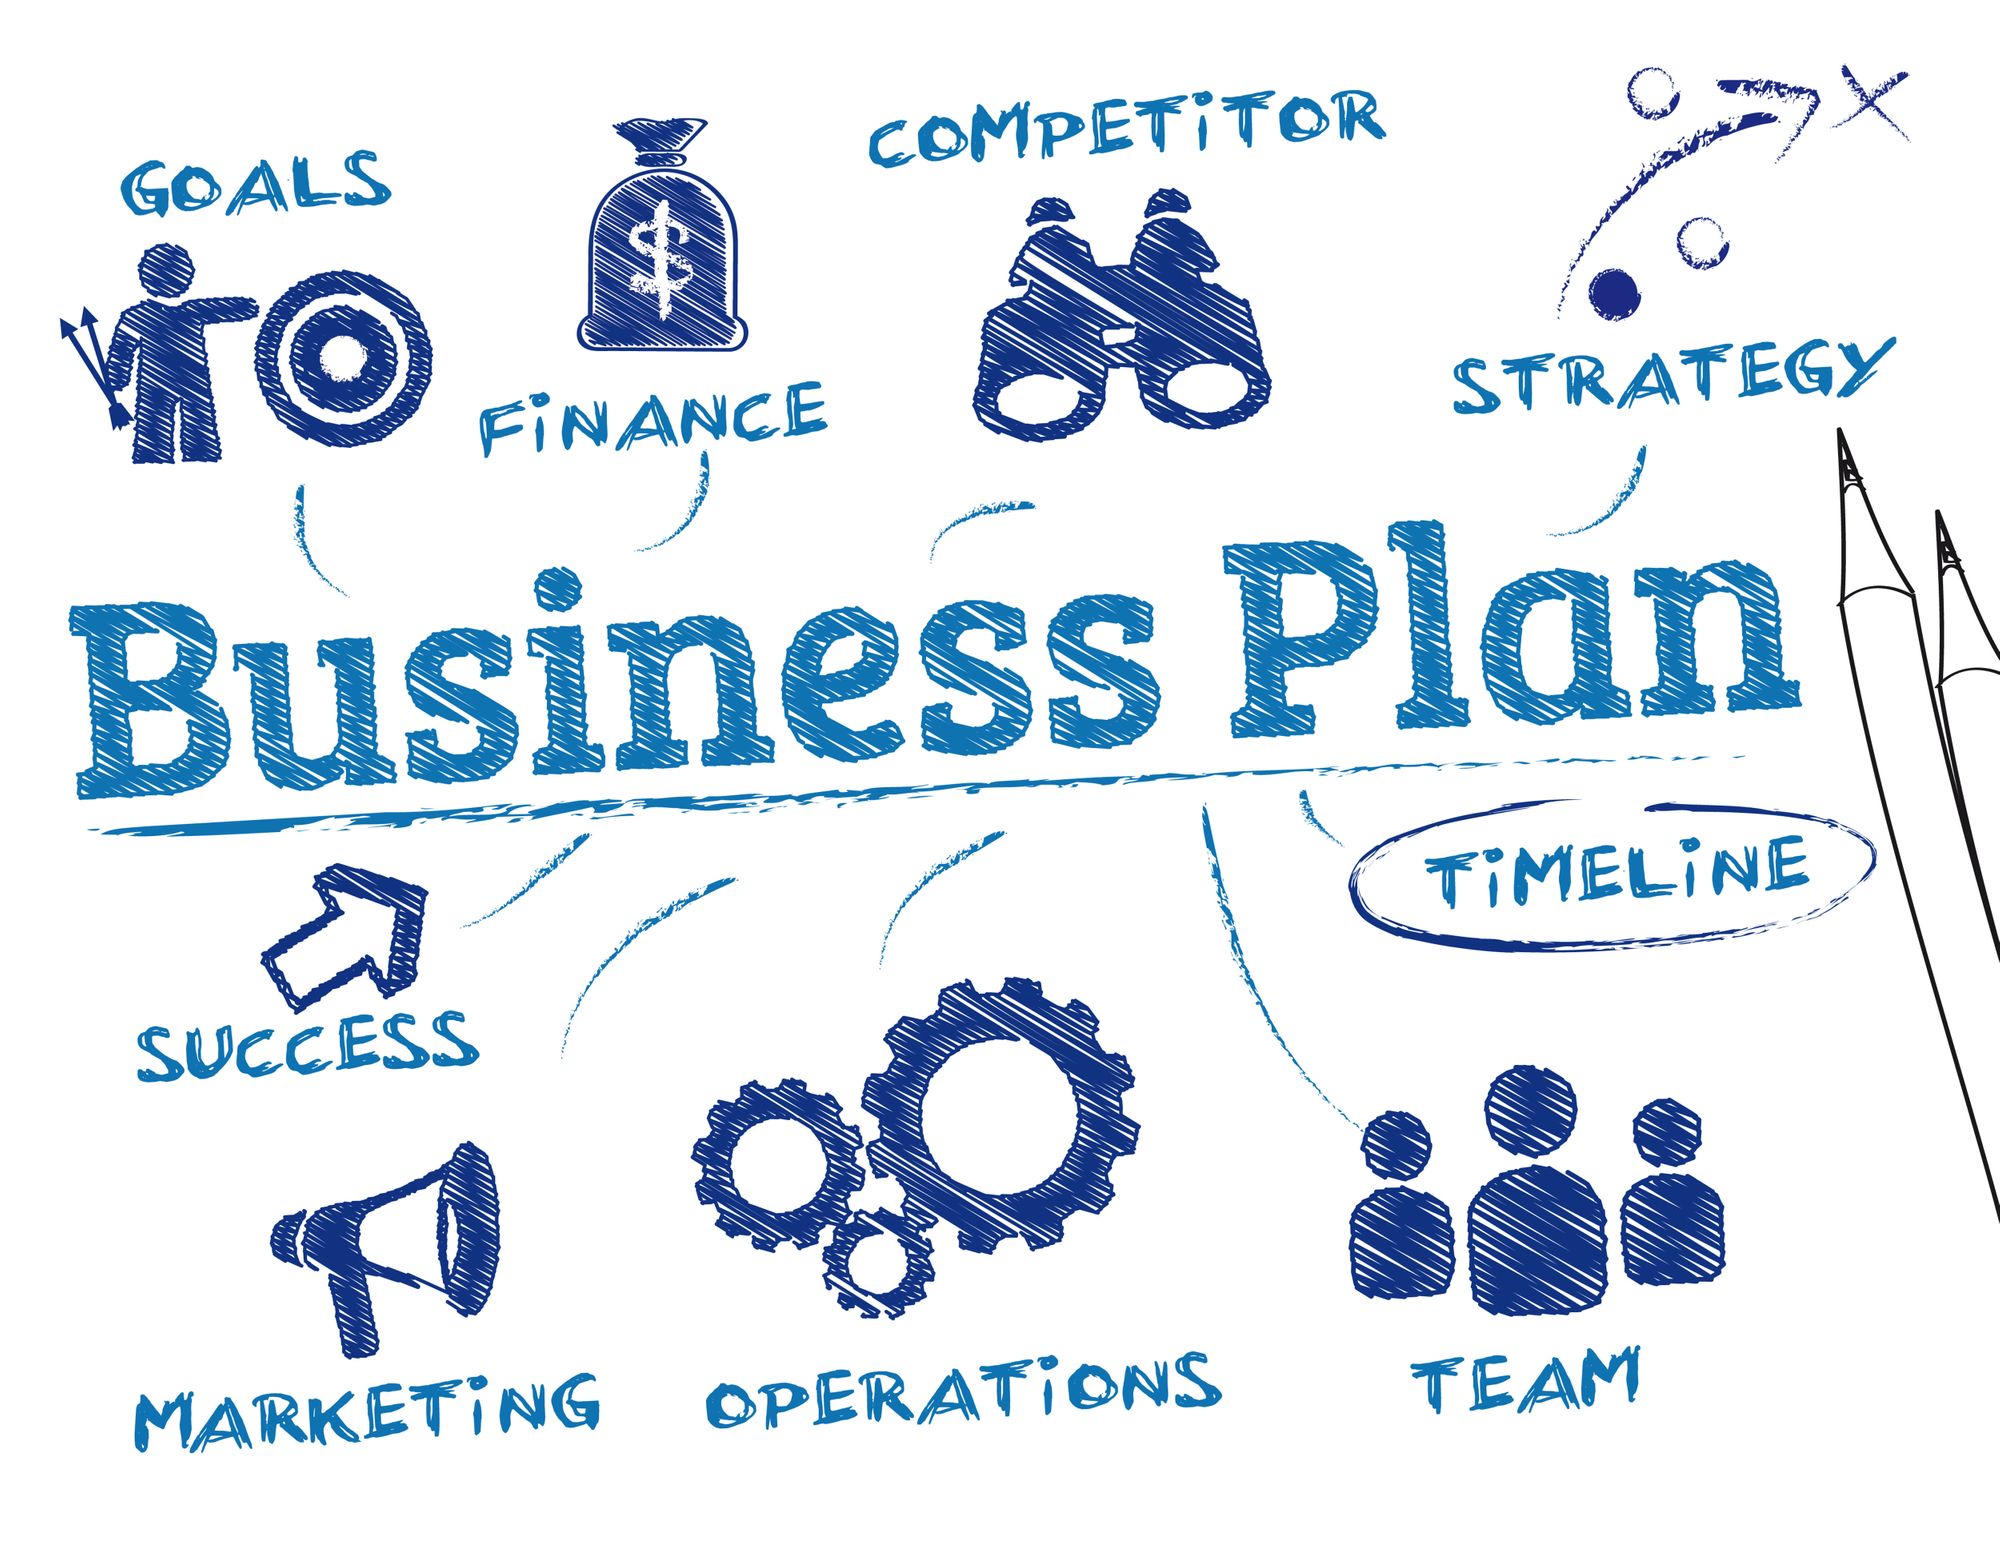 33063I'll write a business plan that includes a financial and marketing model.